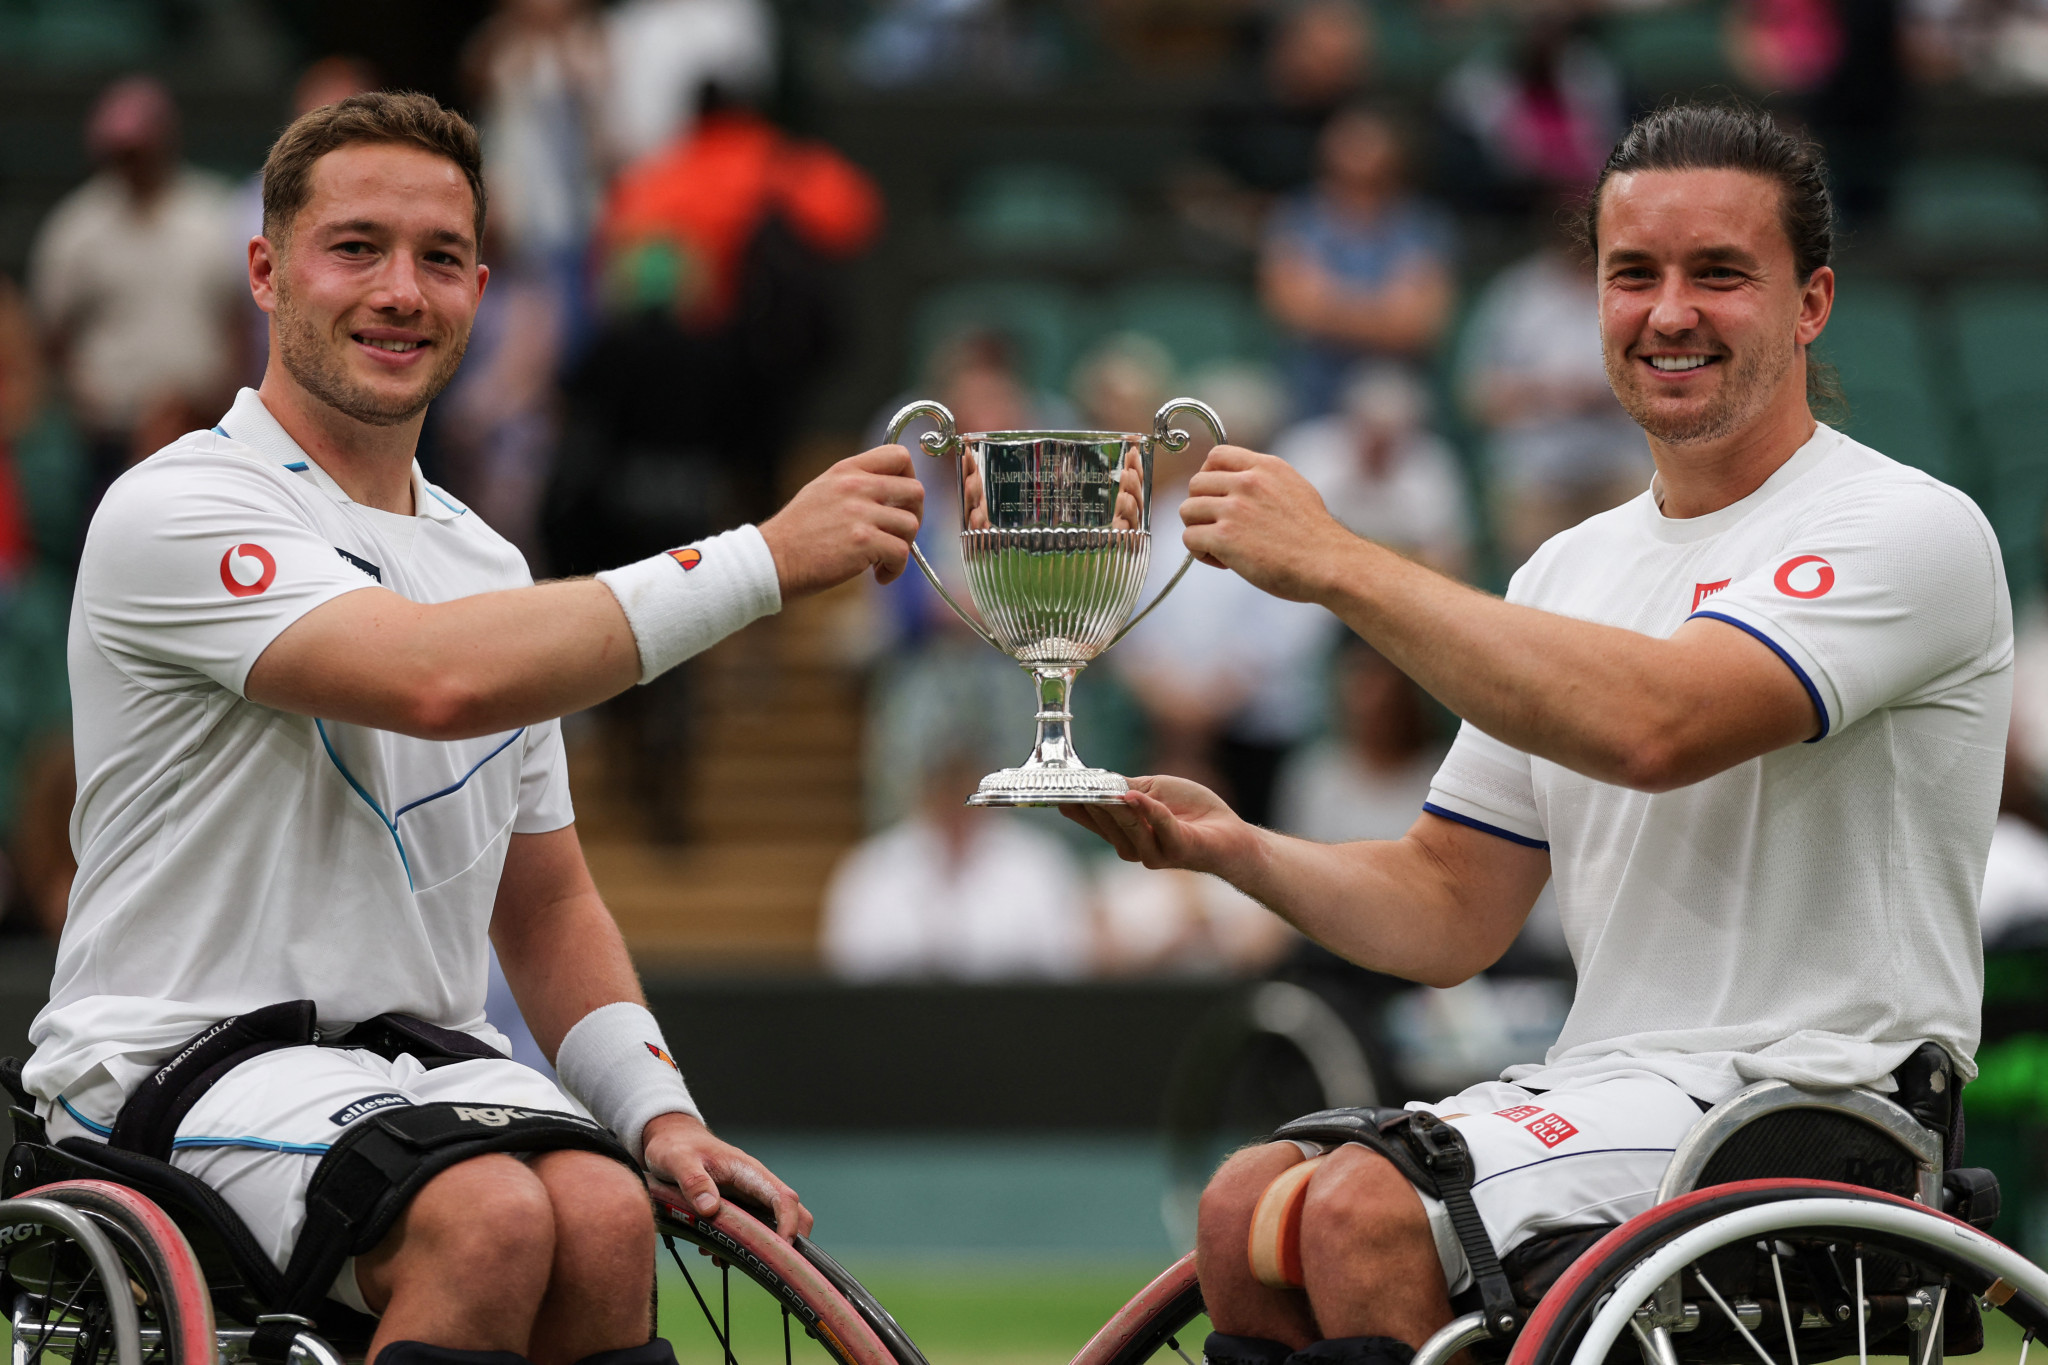 Britain's Alfie Hewett, left, and Gordon Reid pose with the trophy after defeating Japan's Takuya Miki and Tokito Oda ©Getty Images 